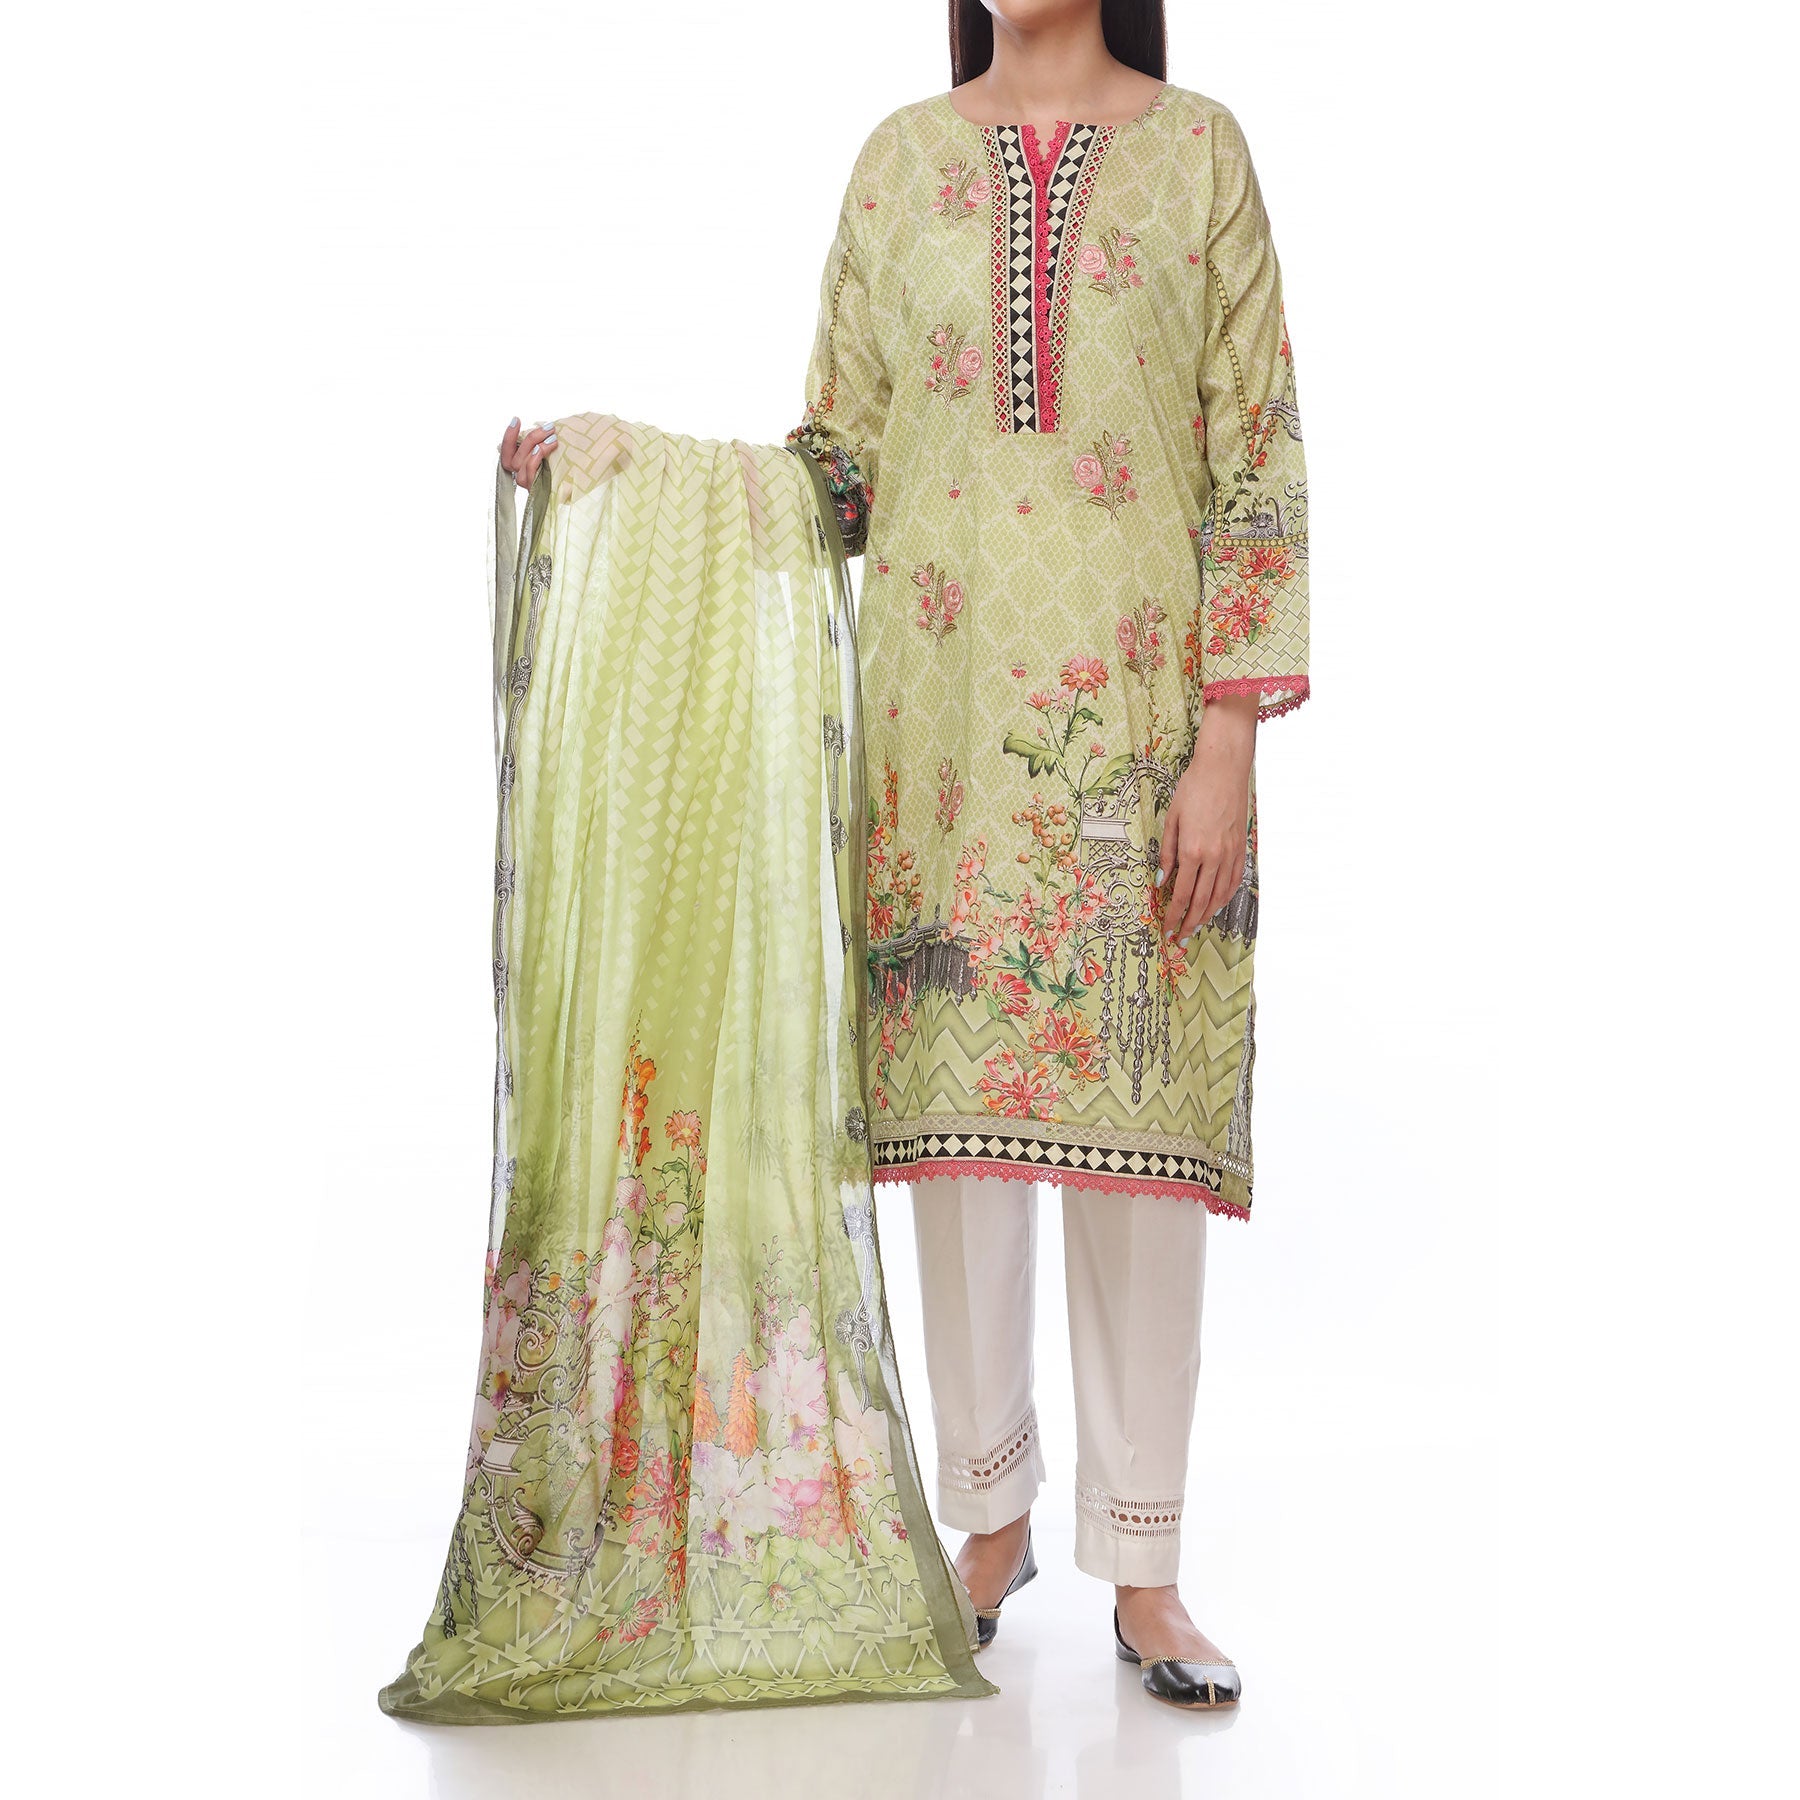 Digital Printed Lawn Shirt With Embroiderd Motif Front
Digital Printed Lawn Duppata